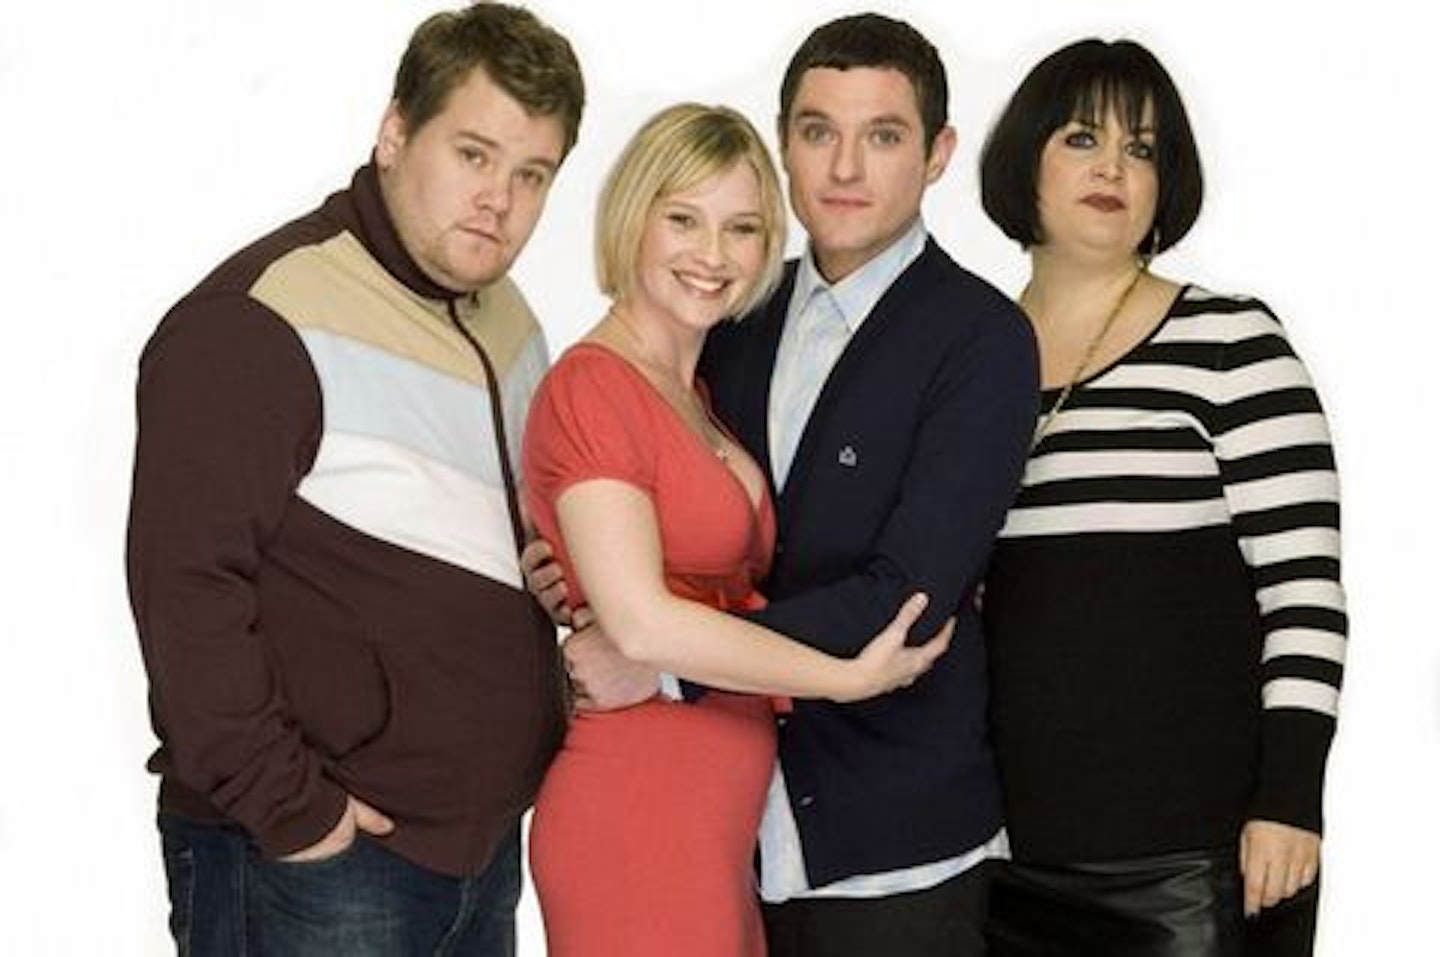 Classic Gavin and Stacey